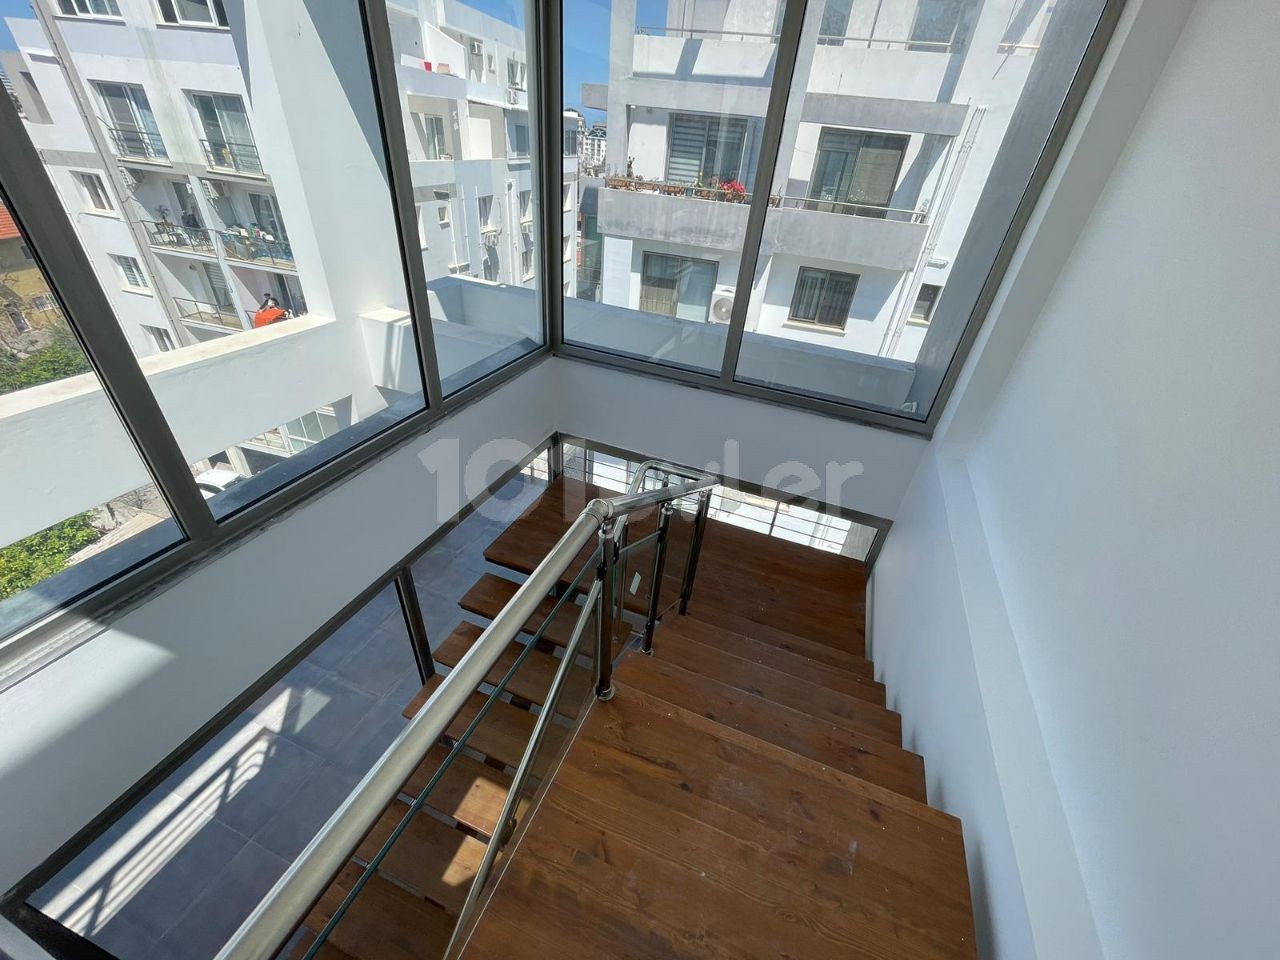 2+1 Loft Penthouse with Mountain and City Views for SALE in Kyrenia Center!